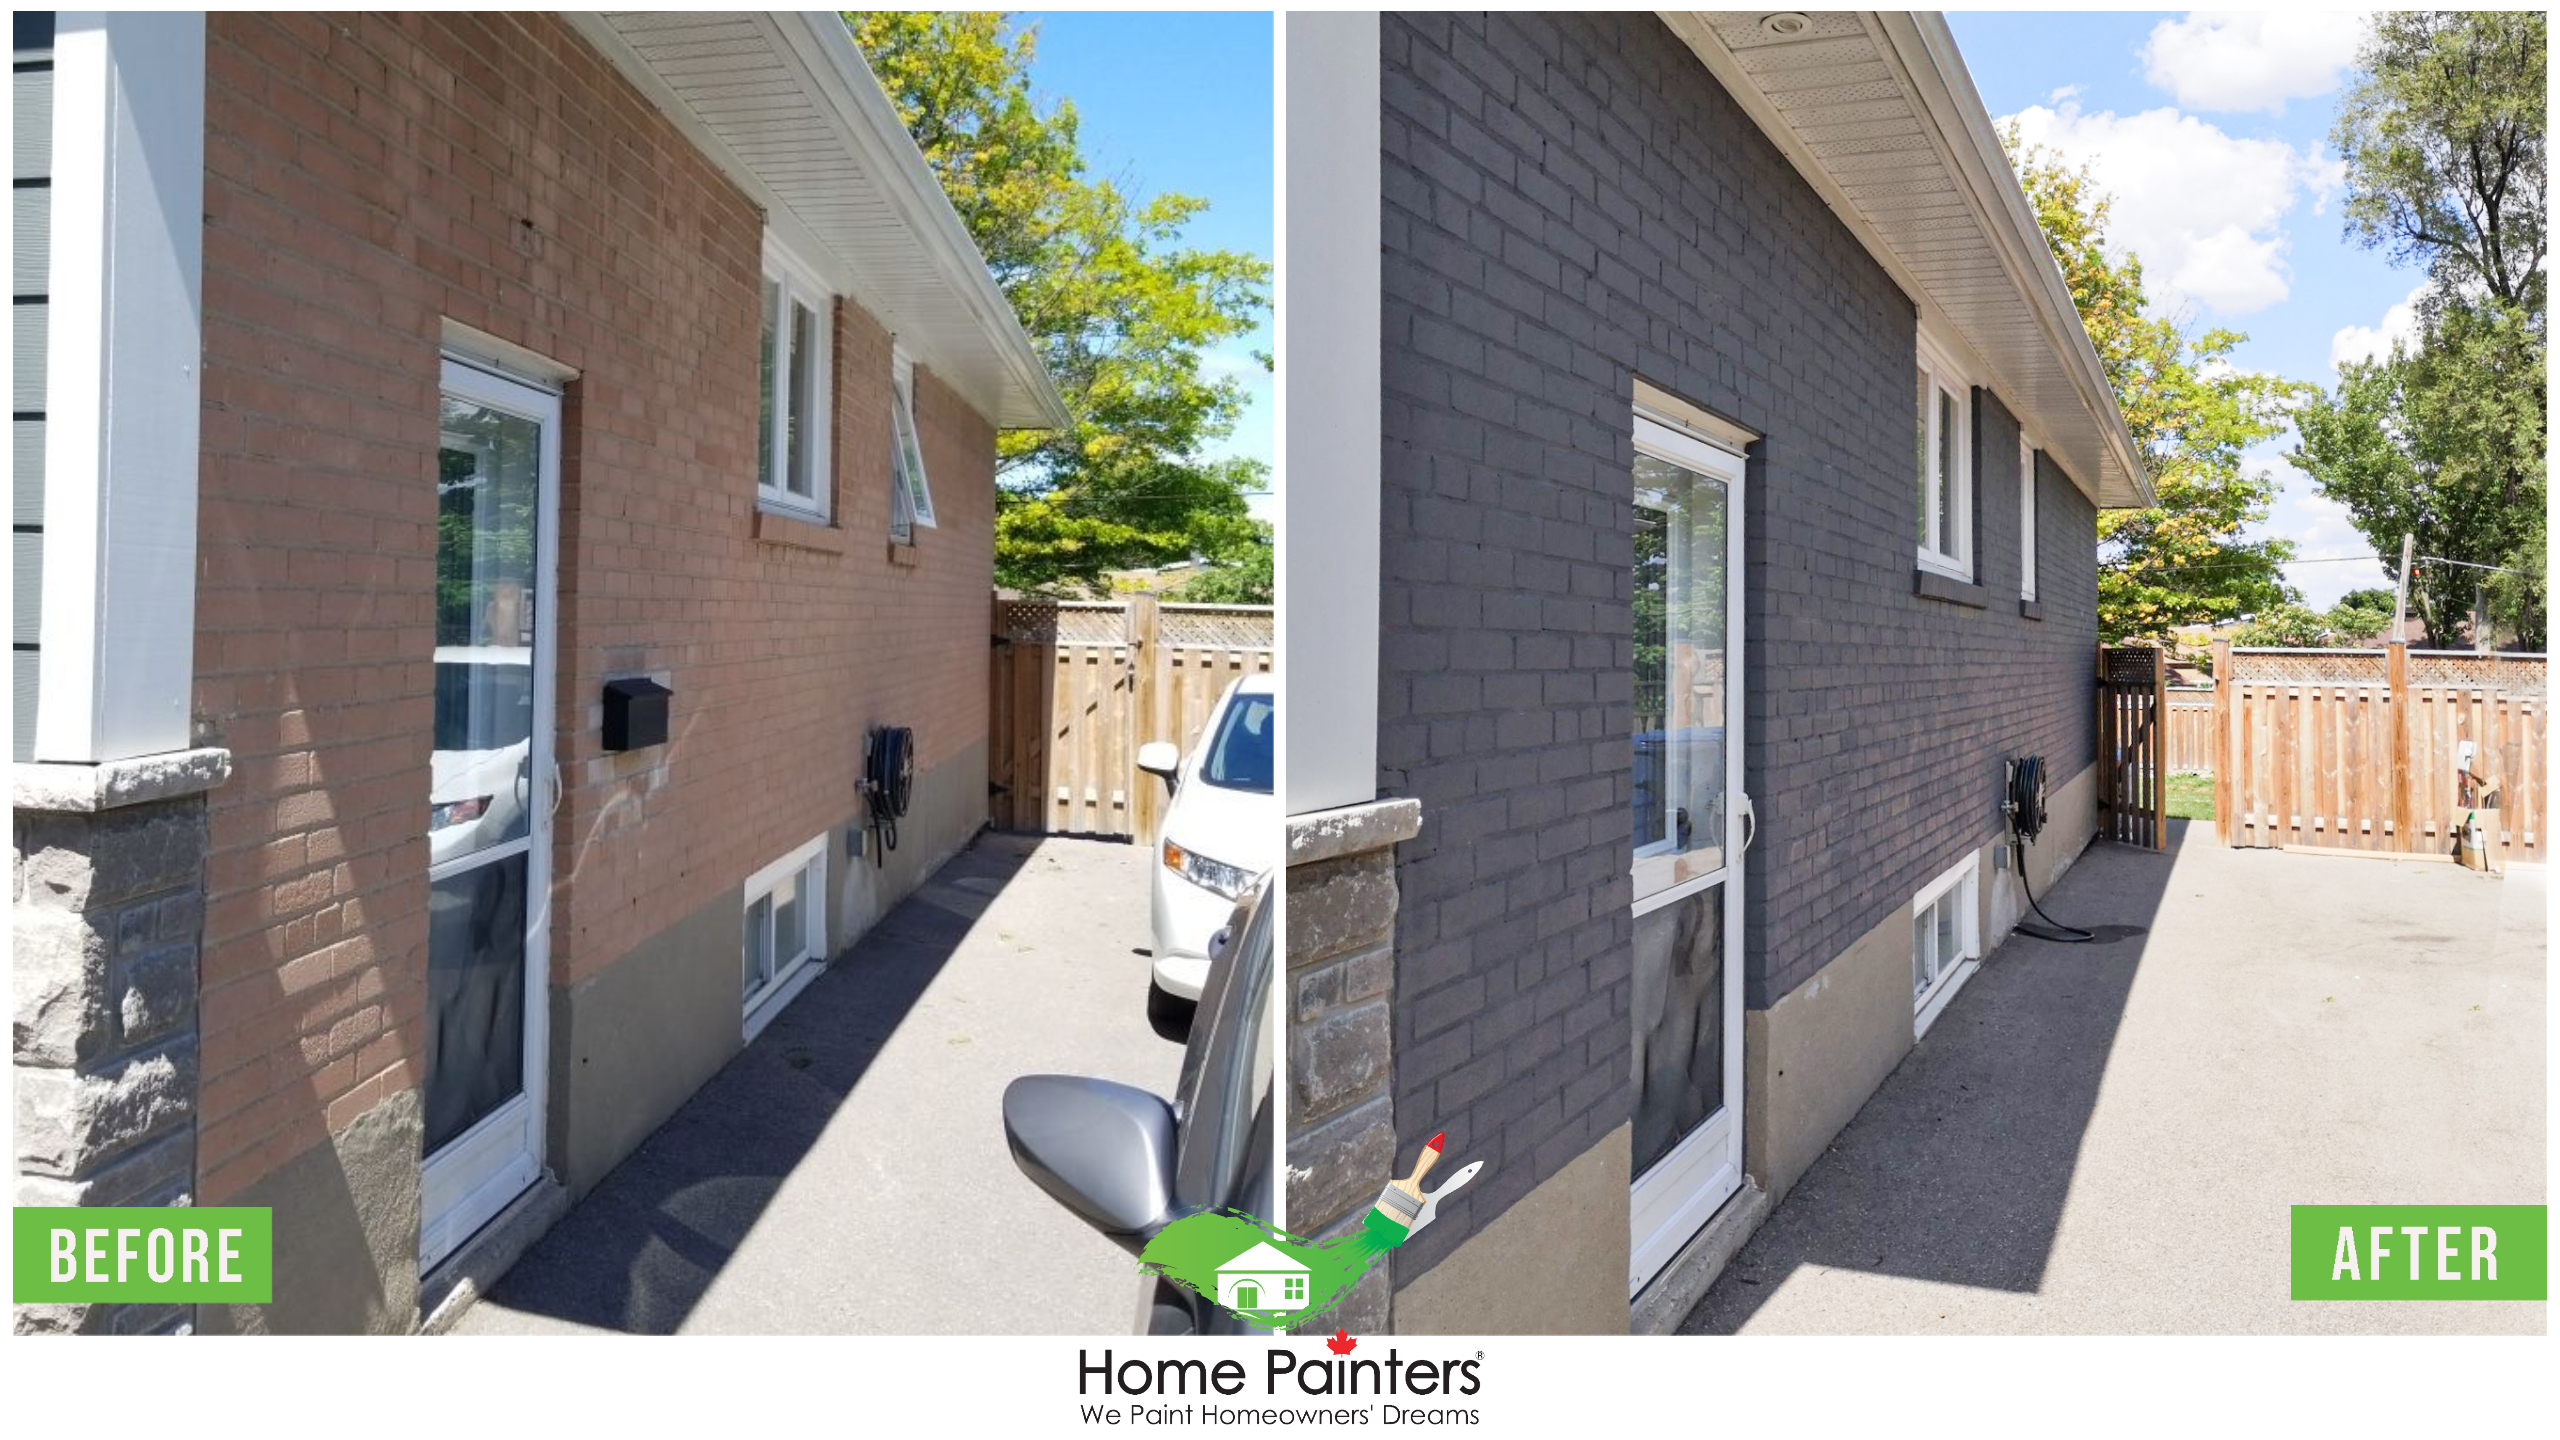 Before and after of a brick stained home, from a red brick to modern dark gray colour, made by Home Painters toronto